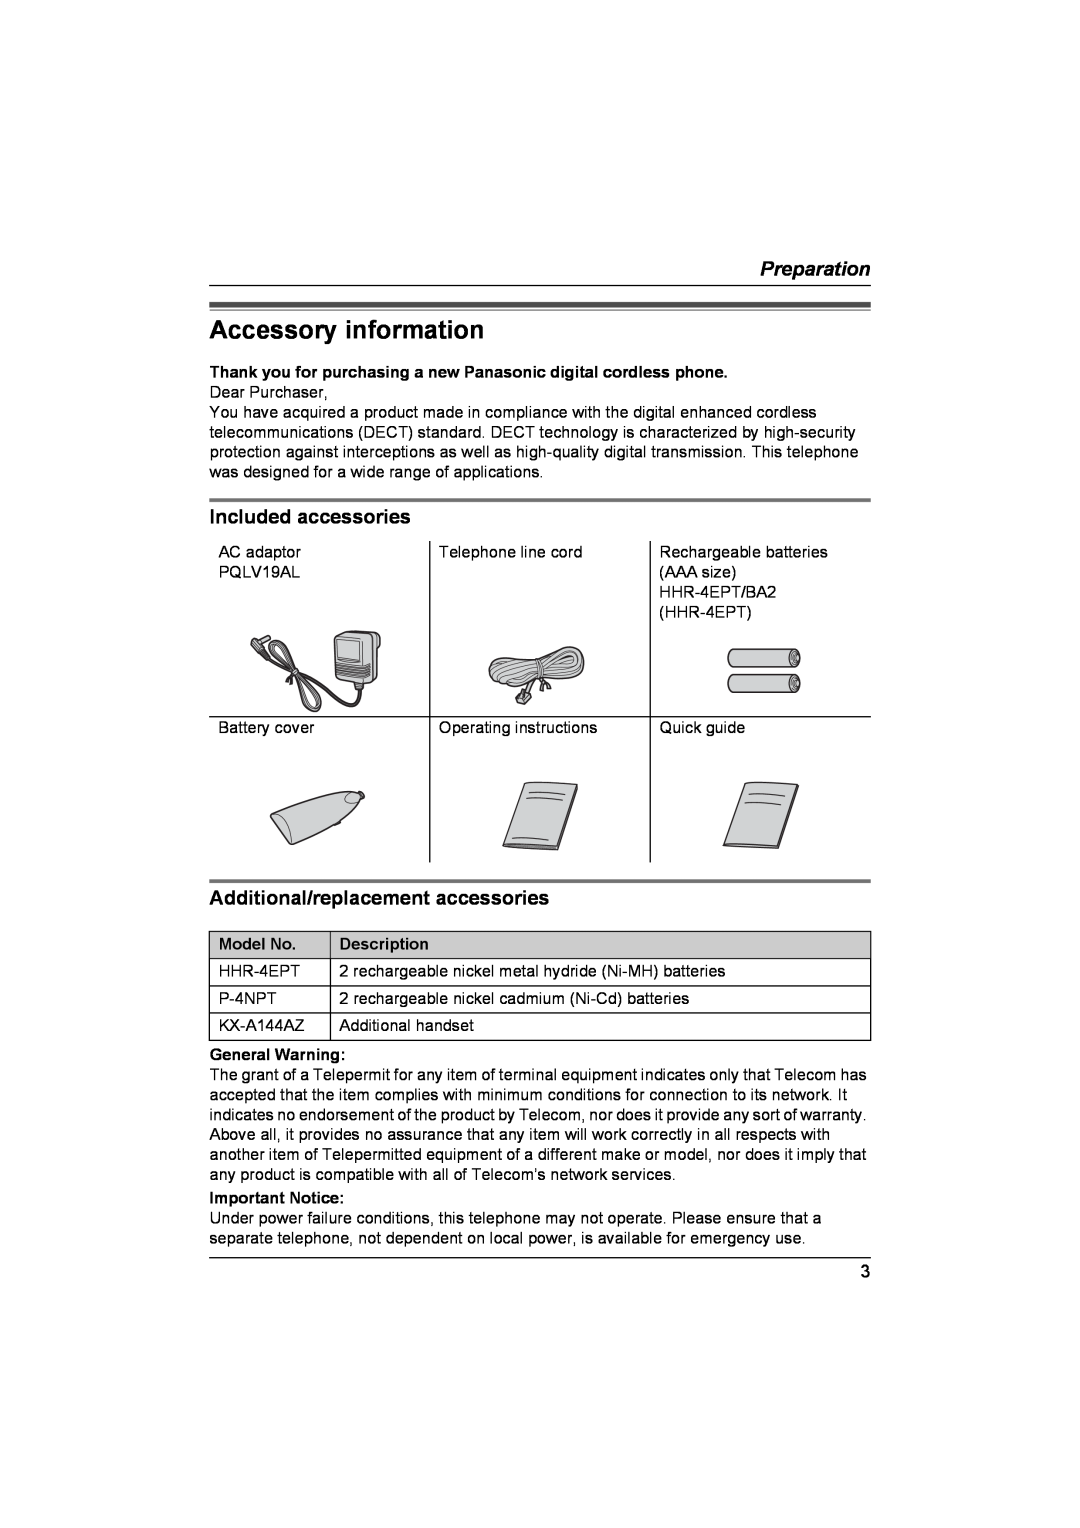 Panasonic KX-TCD440NZ Accessory information, Preparation, Included accessories, Additional/replacement accessories 